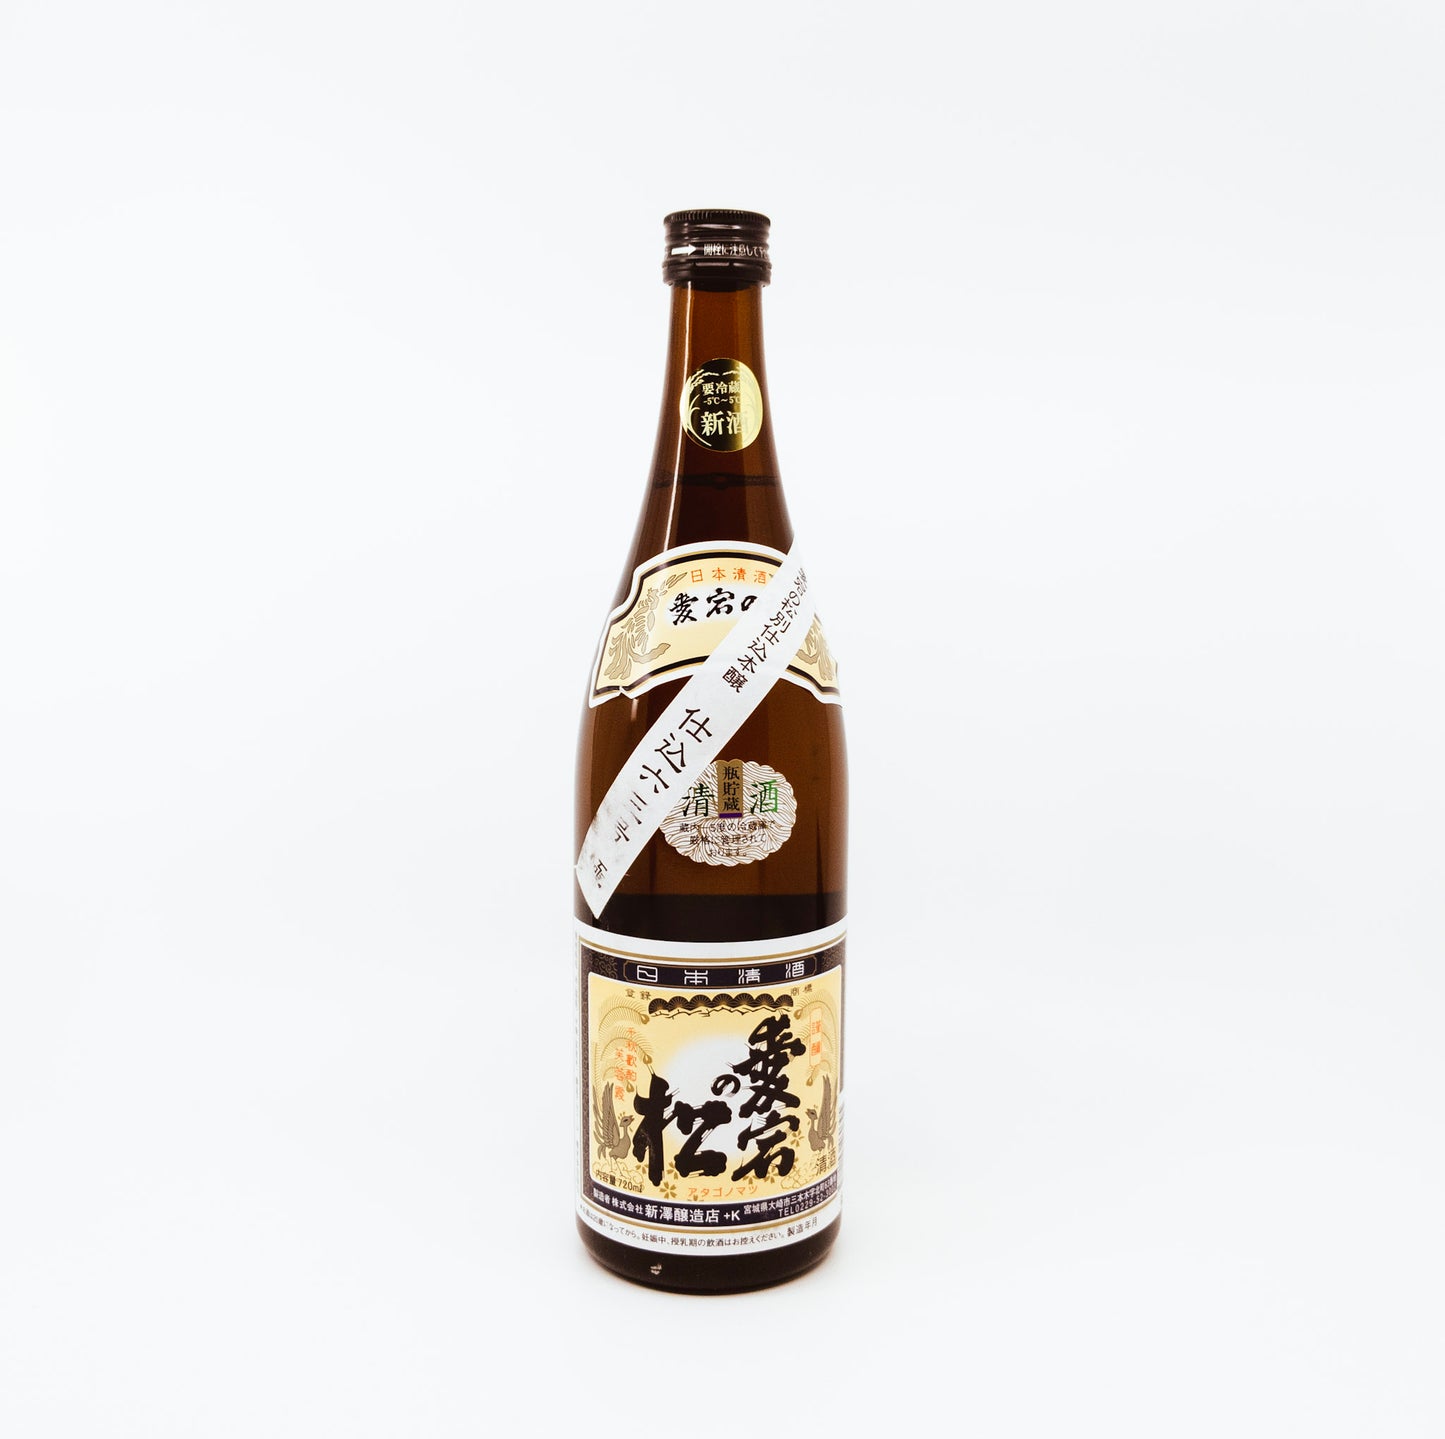 brown bottle with black writing on pale yellow label